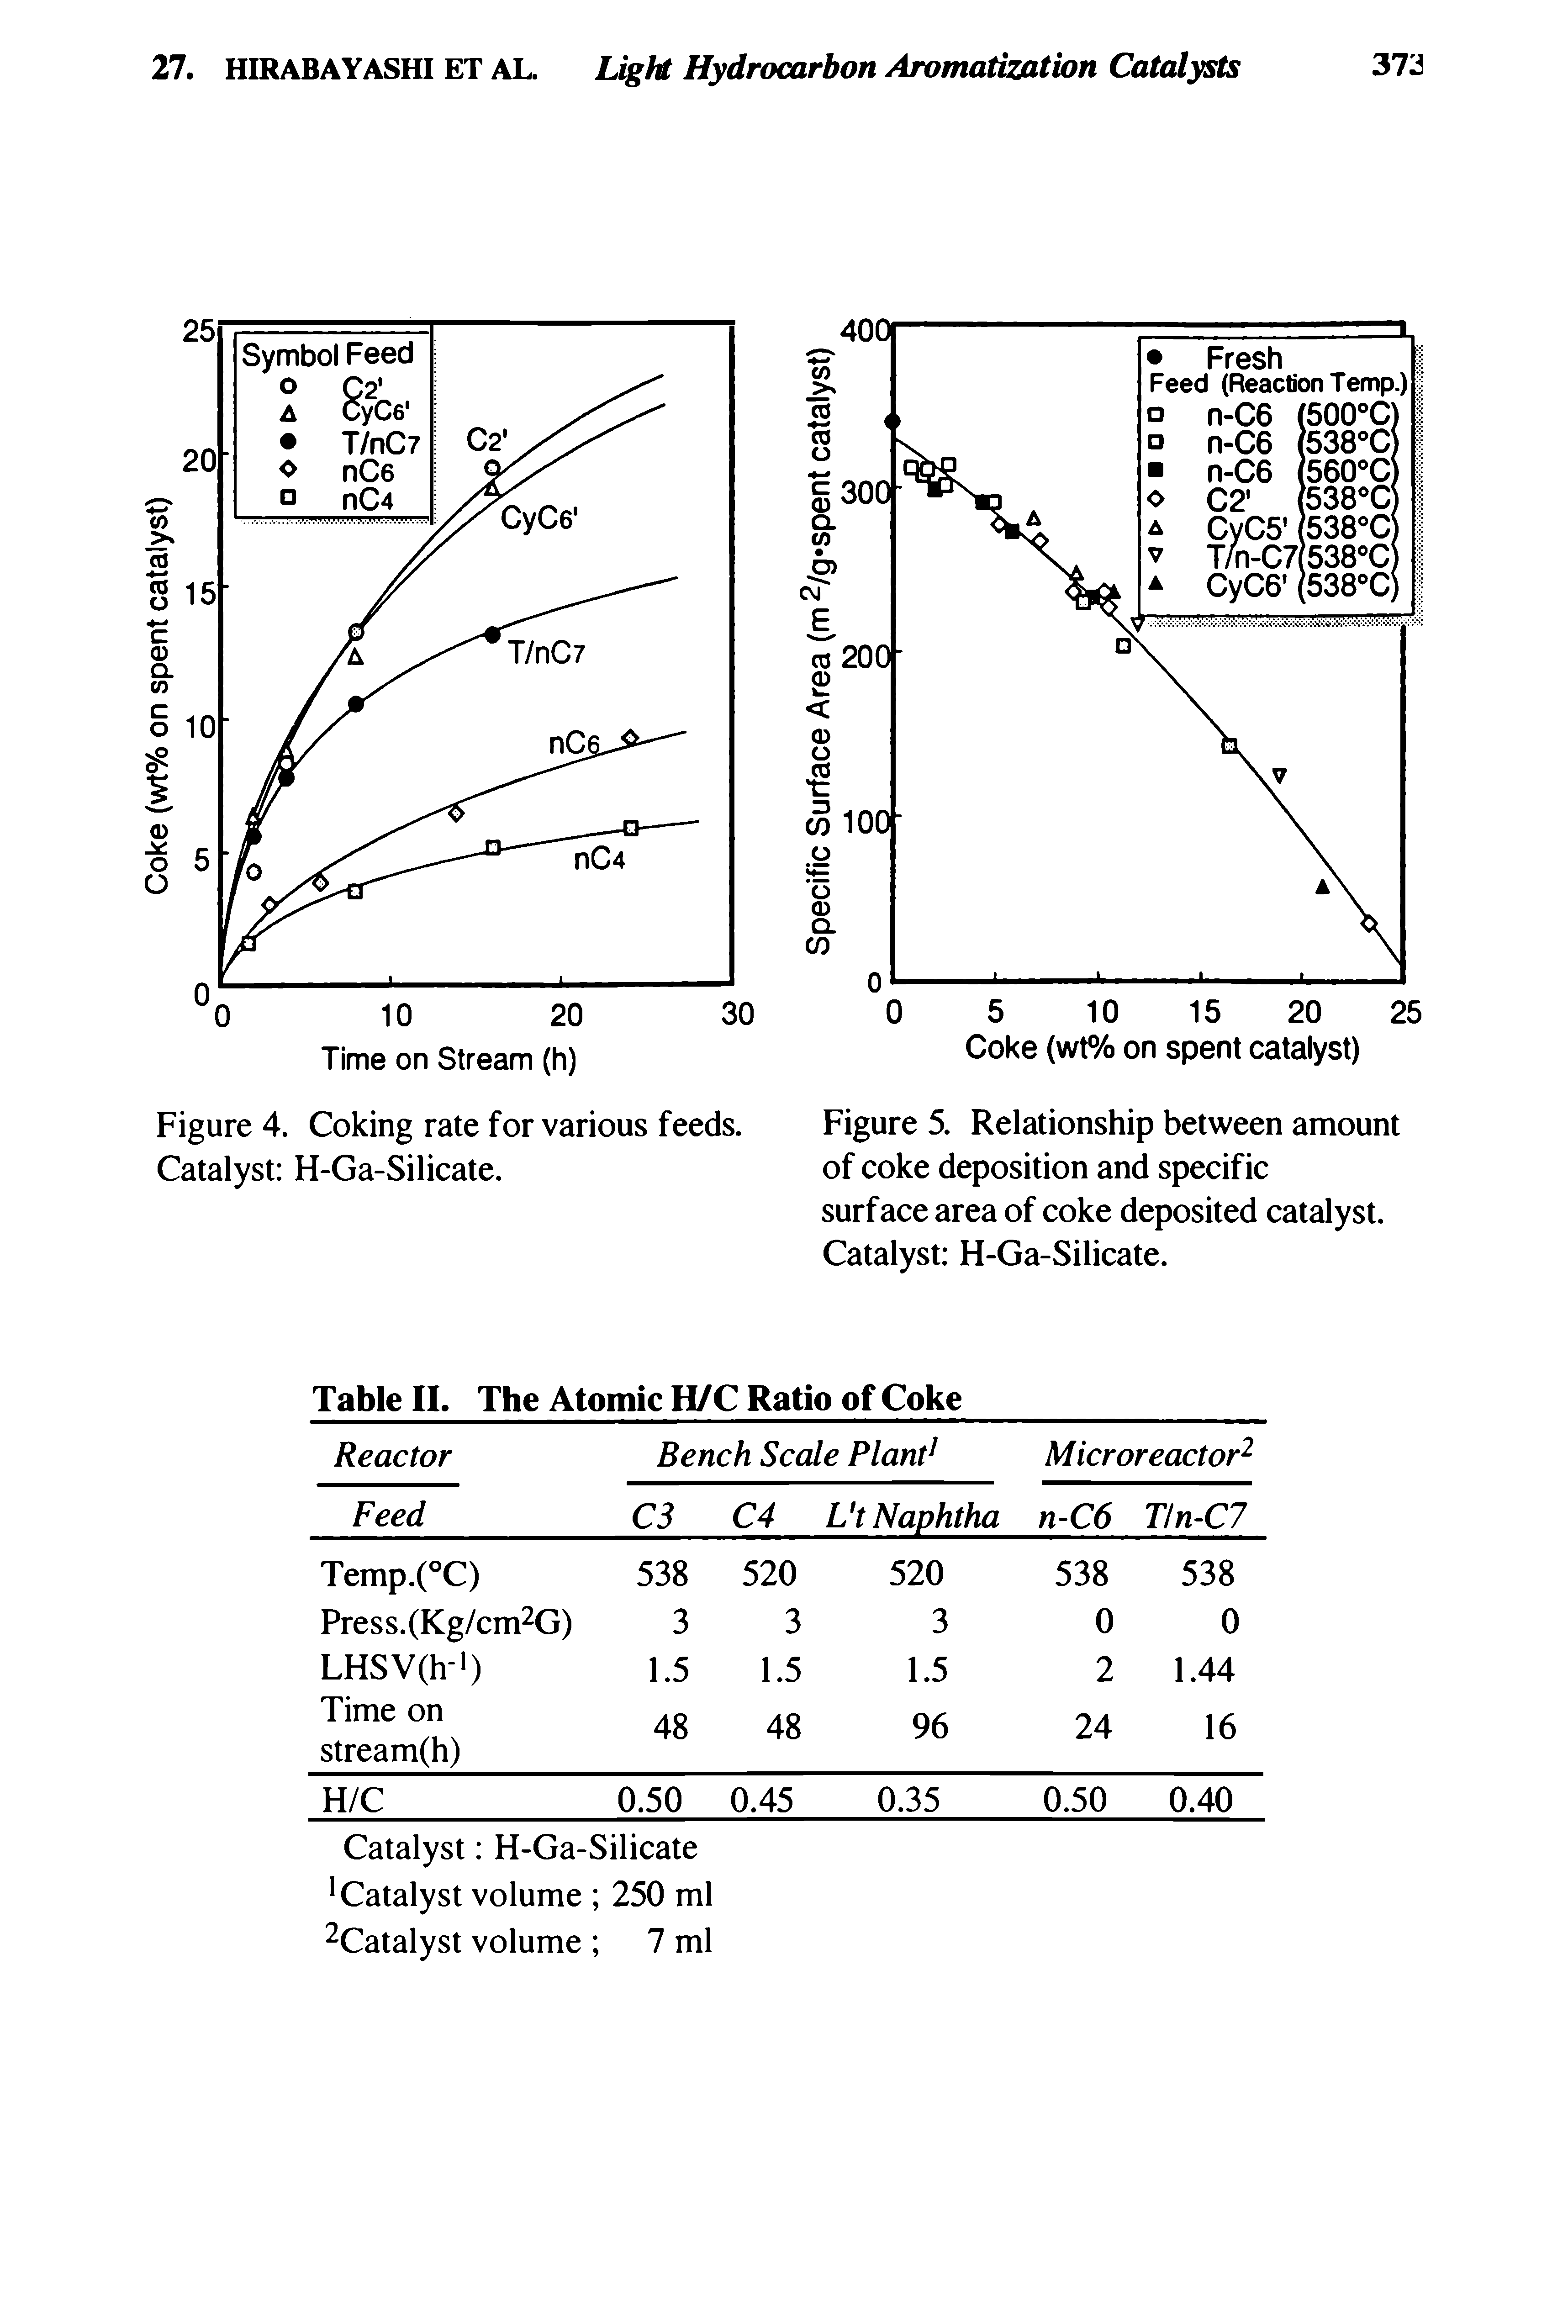 Figure 5. Relationship between amount of coke deposition and specific surface area of coke deposited catalyst. Catalyst H-Ga-Silicate.